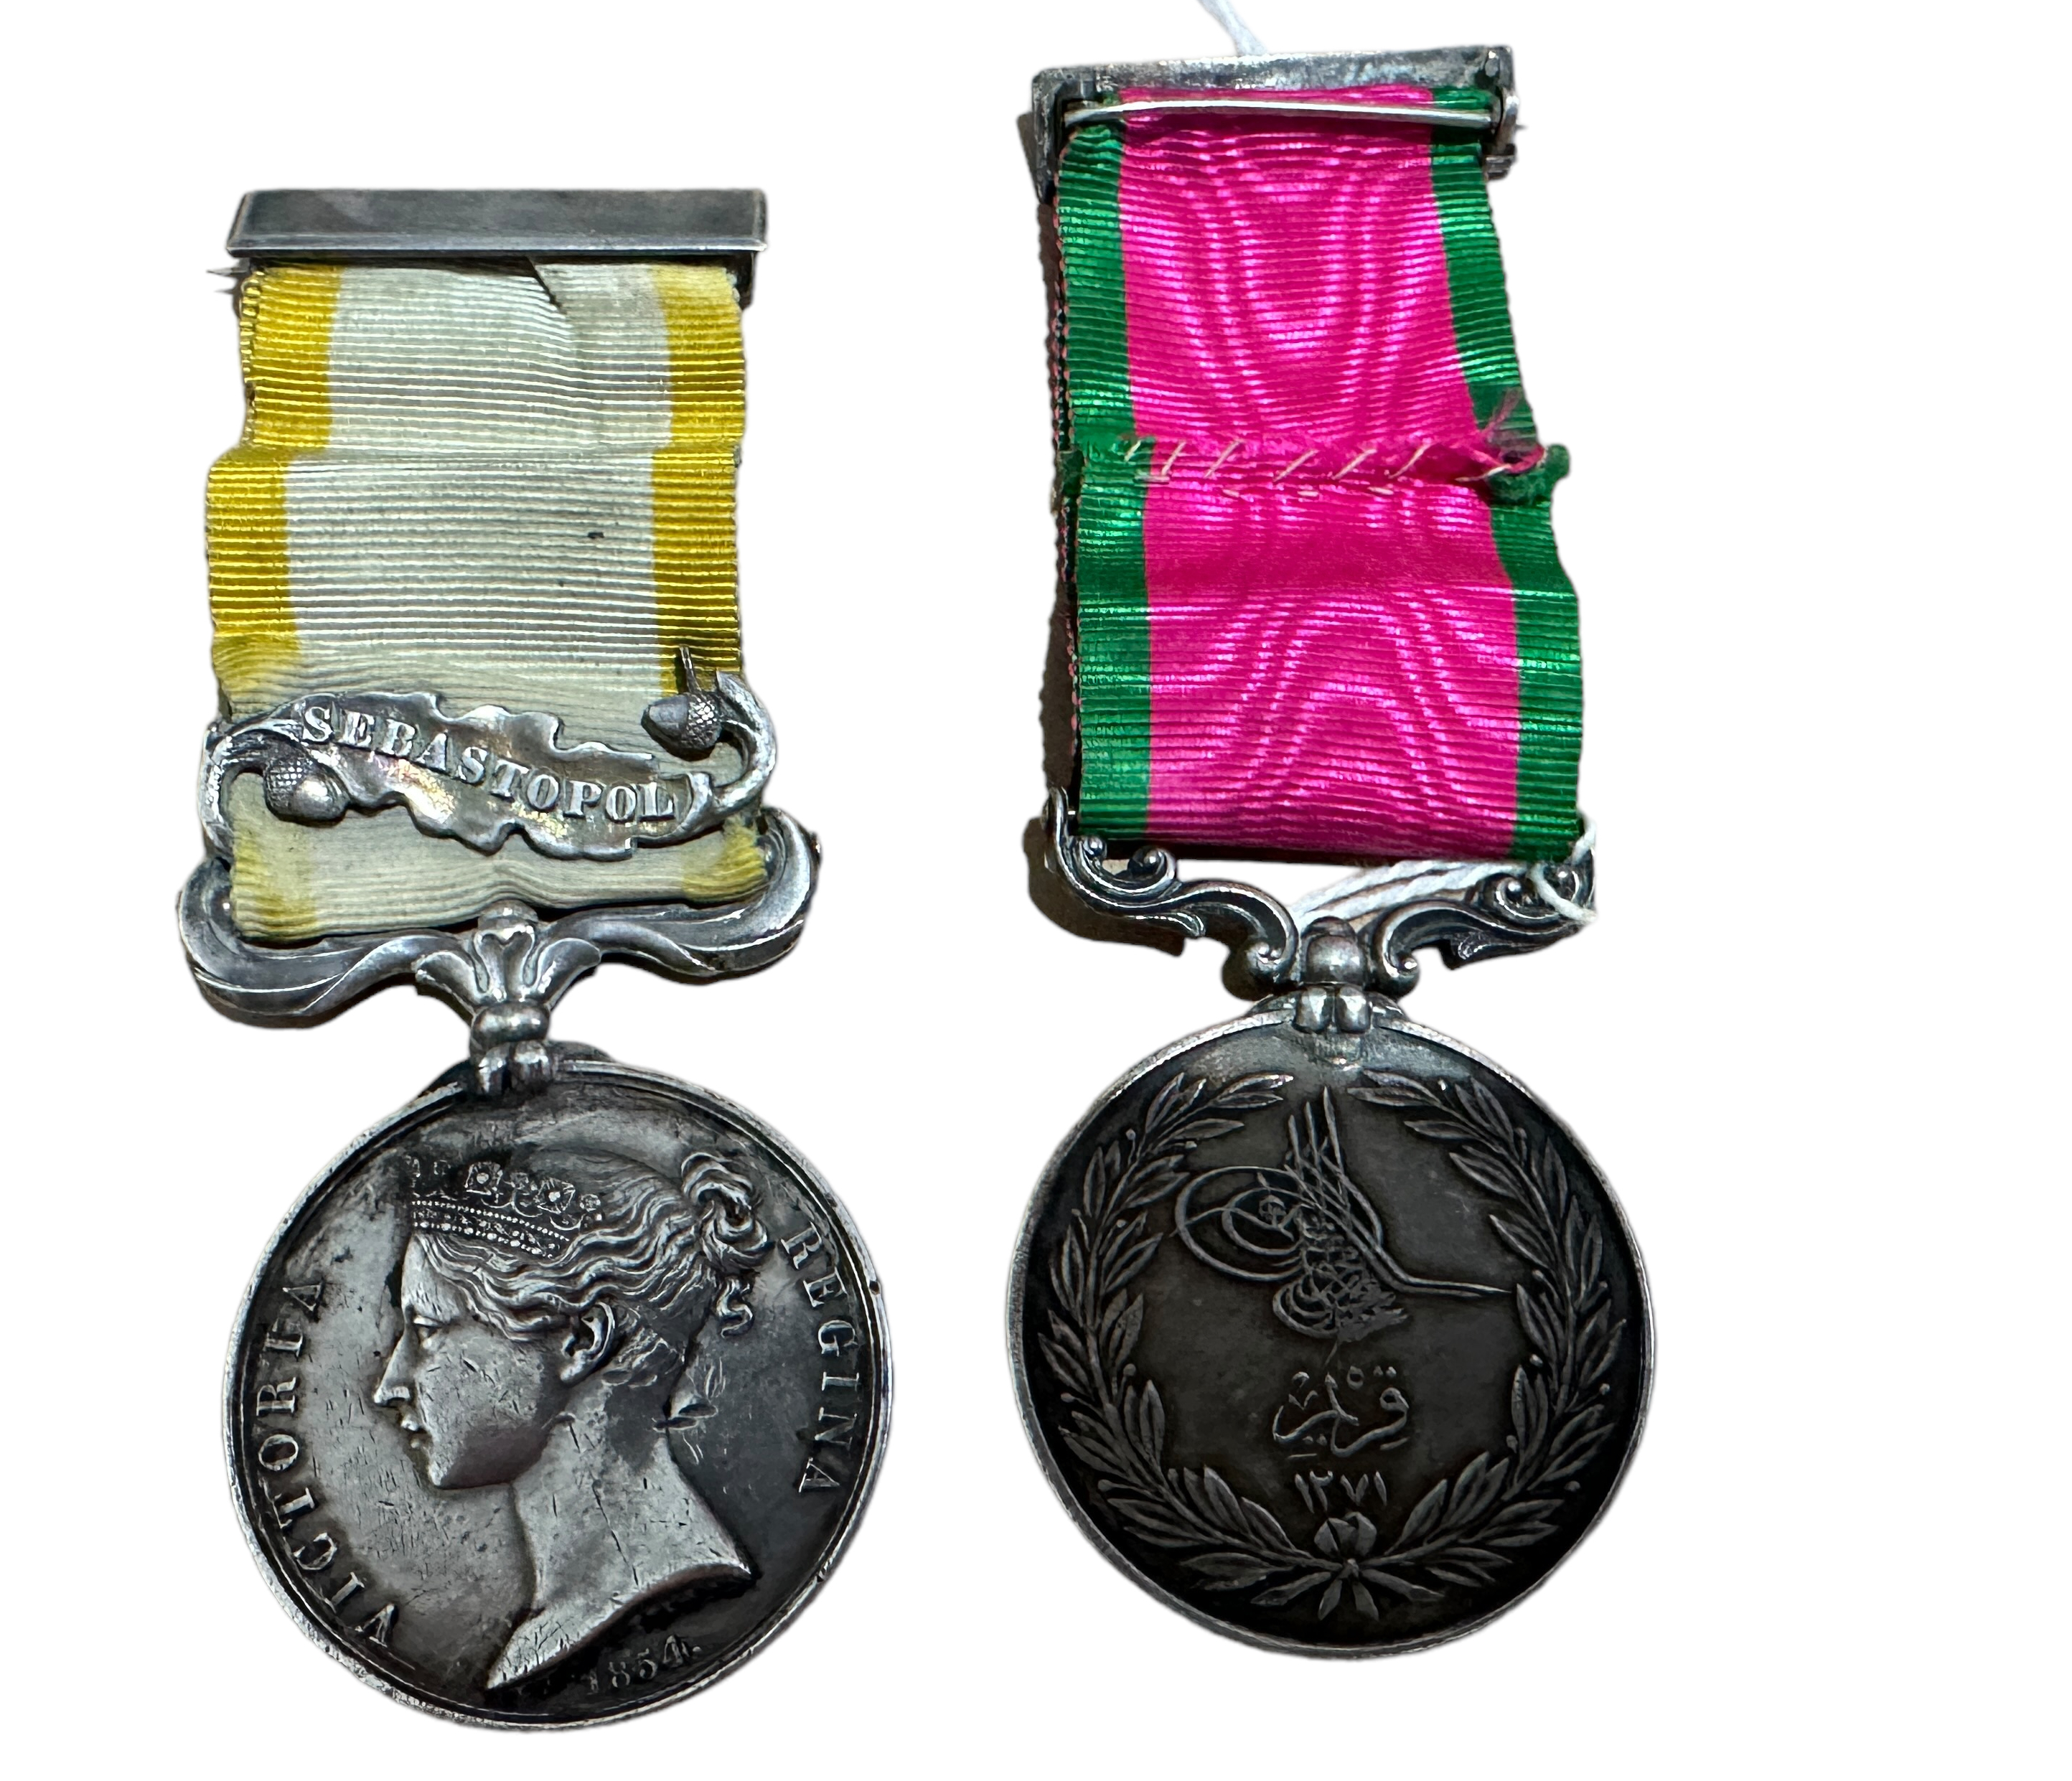 Crimea Pait of Medals to a: W.KERR. TROOPER. ROYAL HORSE ARTY. - Image 2 of 6